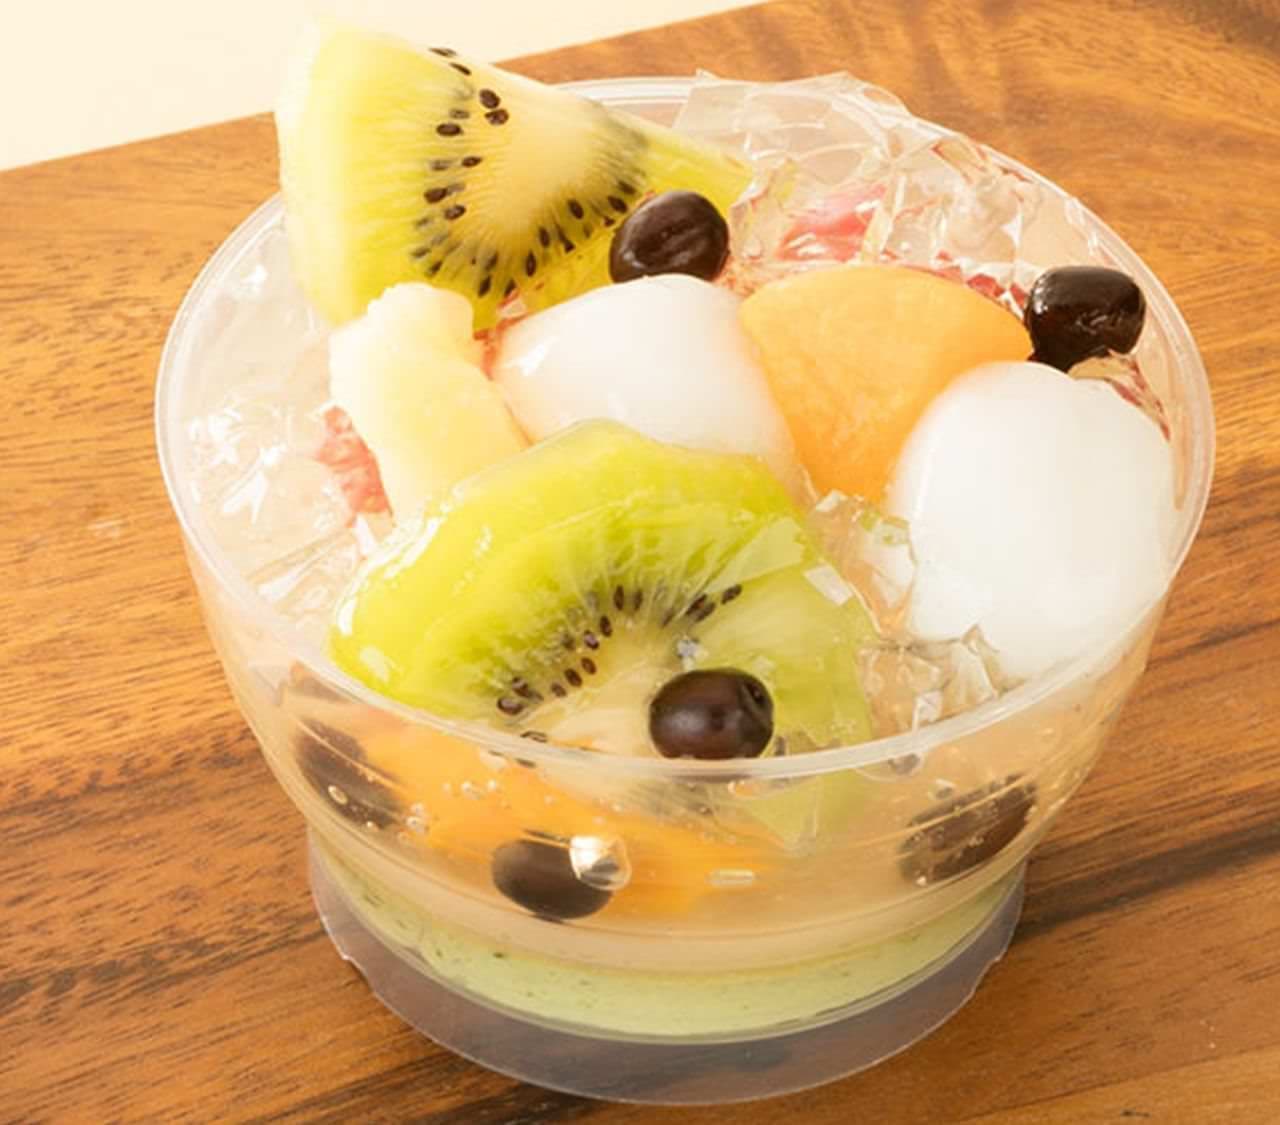 Chateraise "Mitsumame Jelly Japanese Cool Dessert"